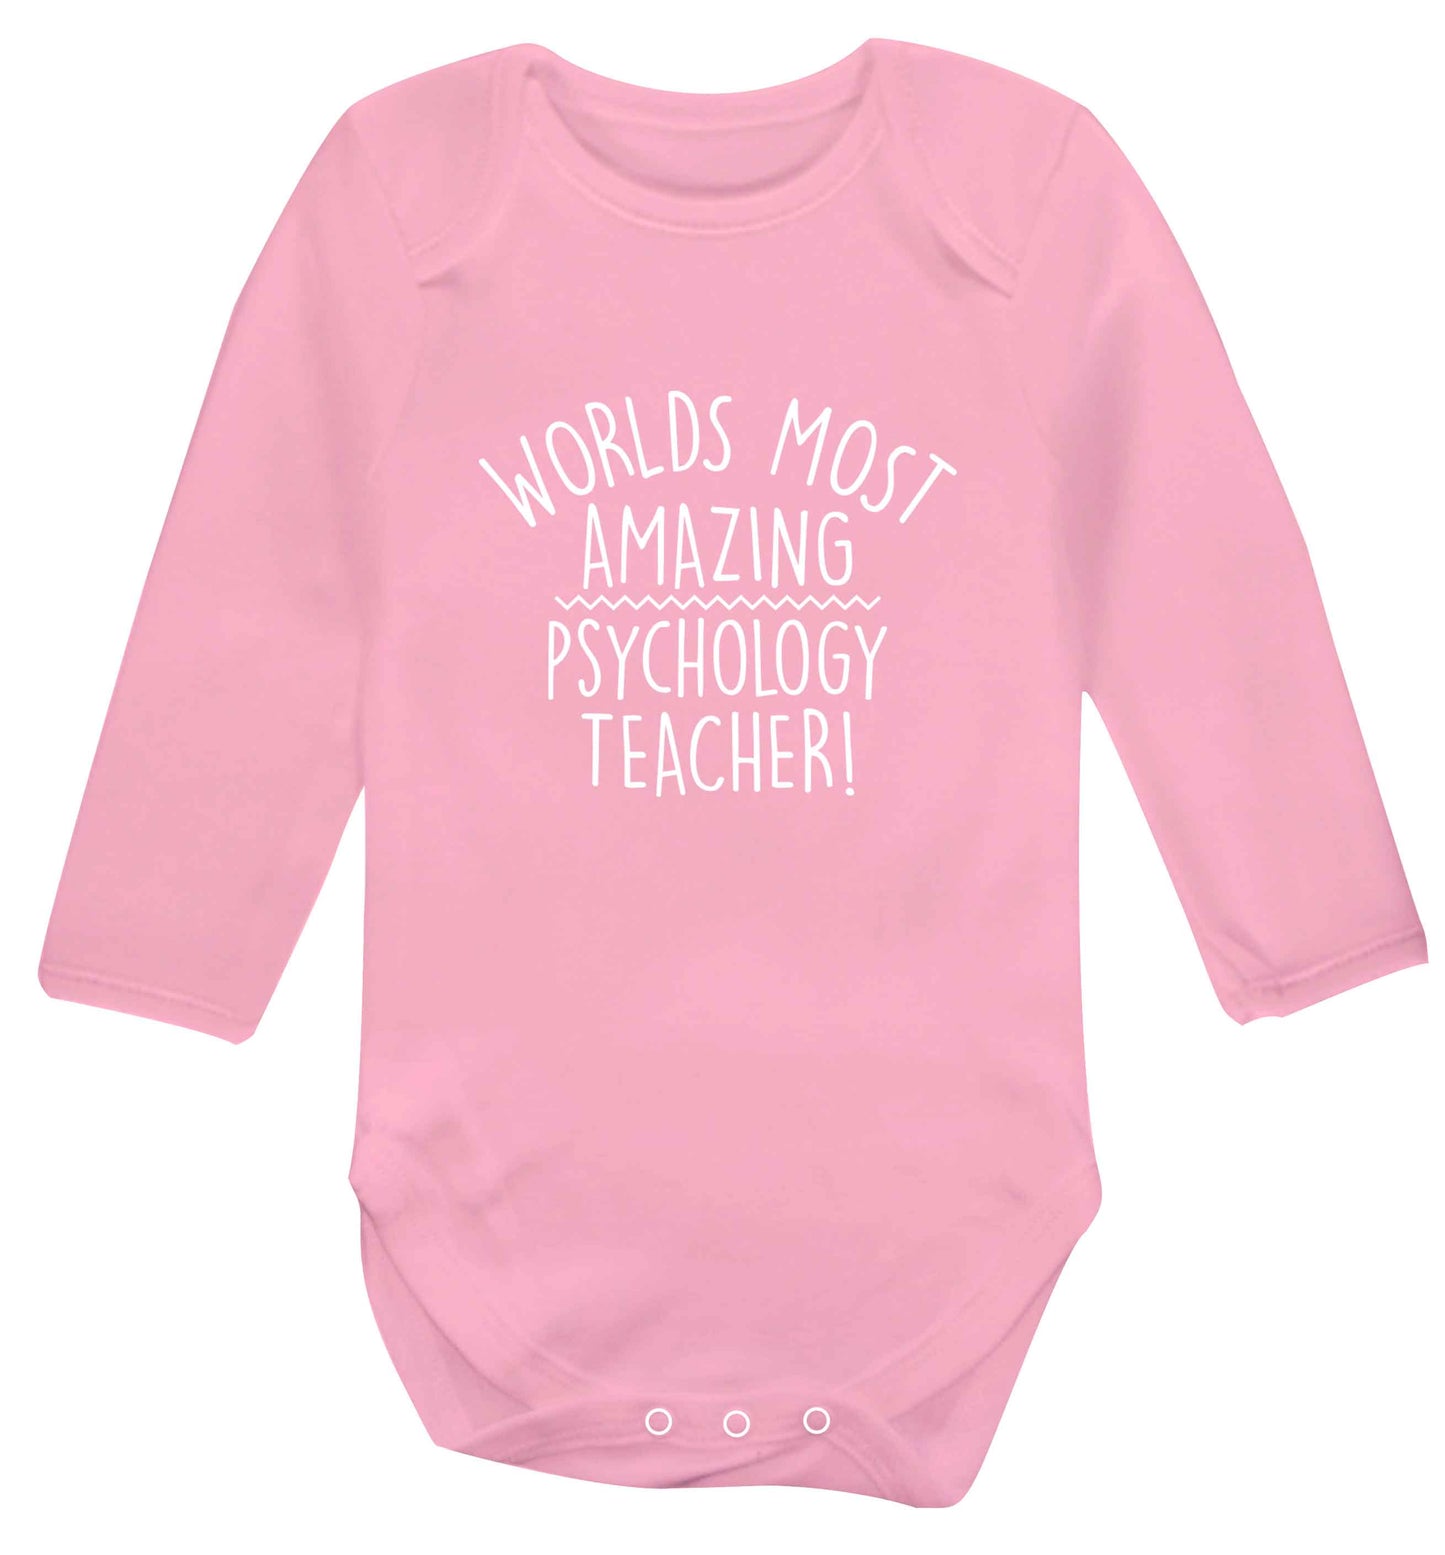 Worlds most amazing psychology teacher baby vest long sleeved pale pink 6-12 months